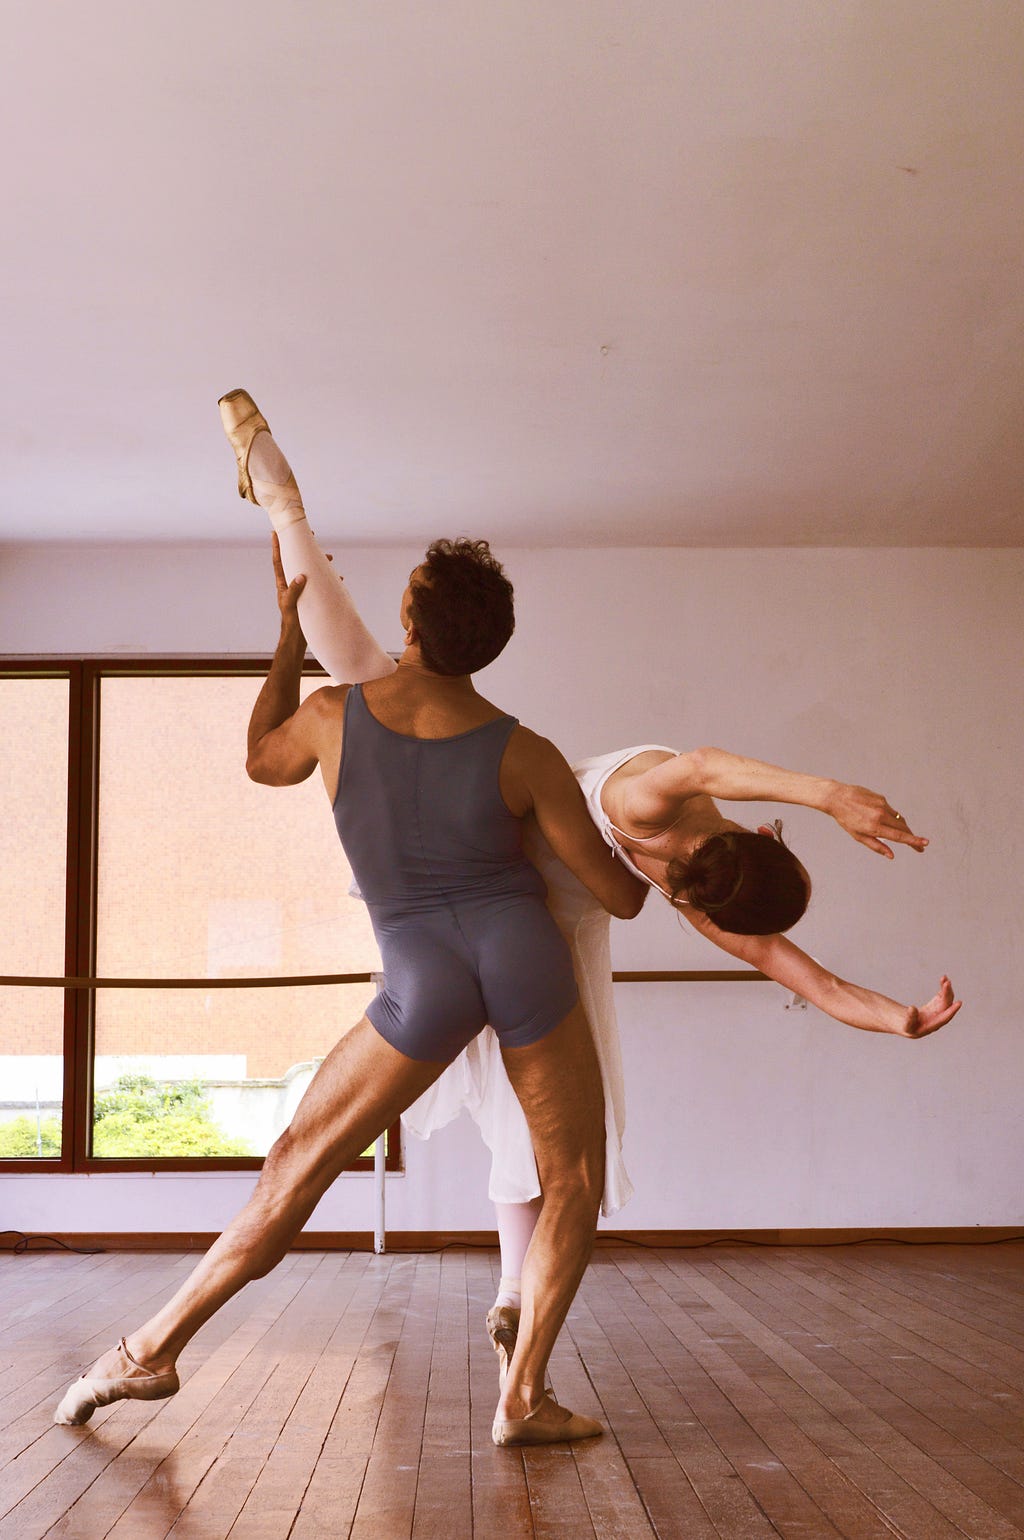 A male ballet dancer holding up a female ballet dancer as she performs.